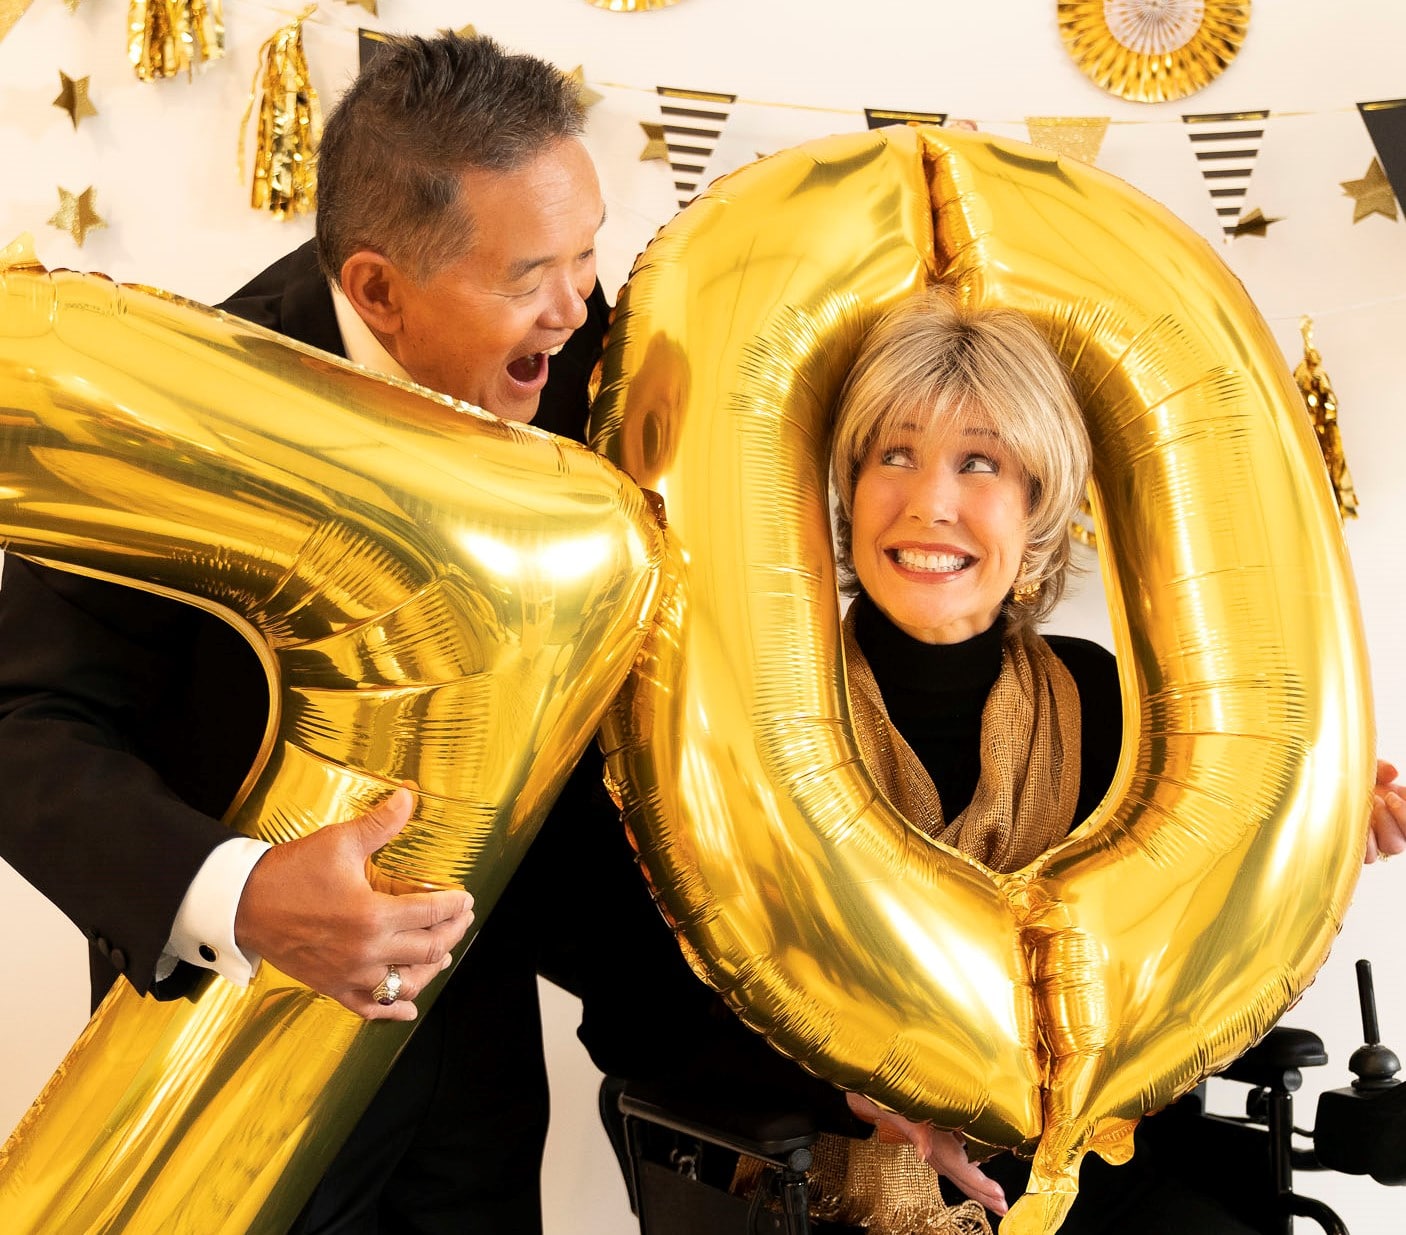 A close up of Joni and Ken smiling at each other as they hold birthday balloons in the shape of the number seventy with banners behind her.